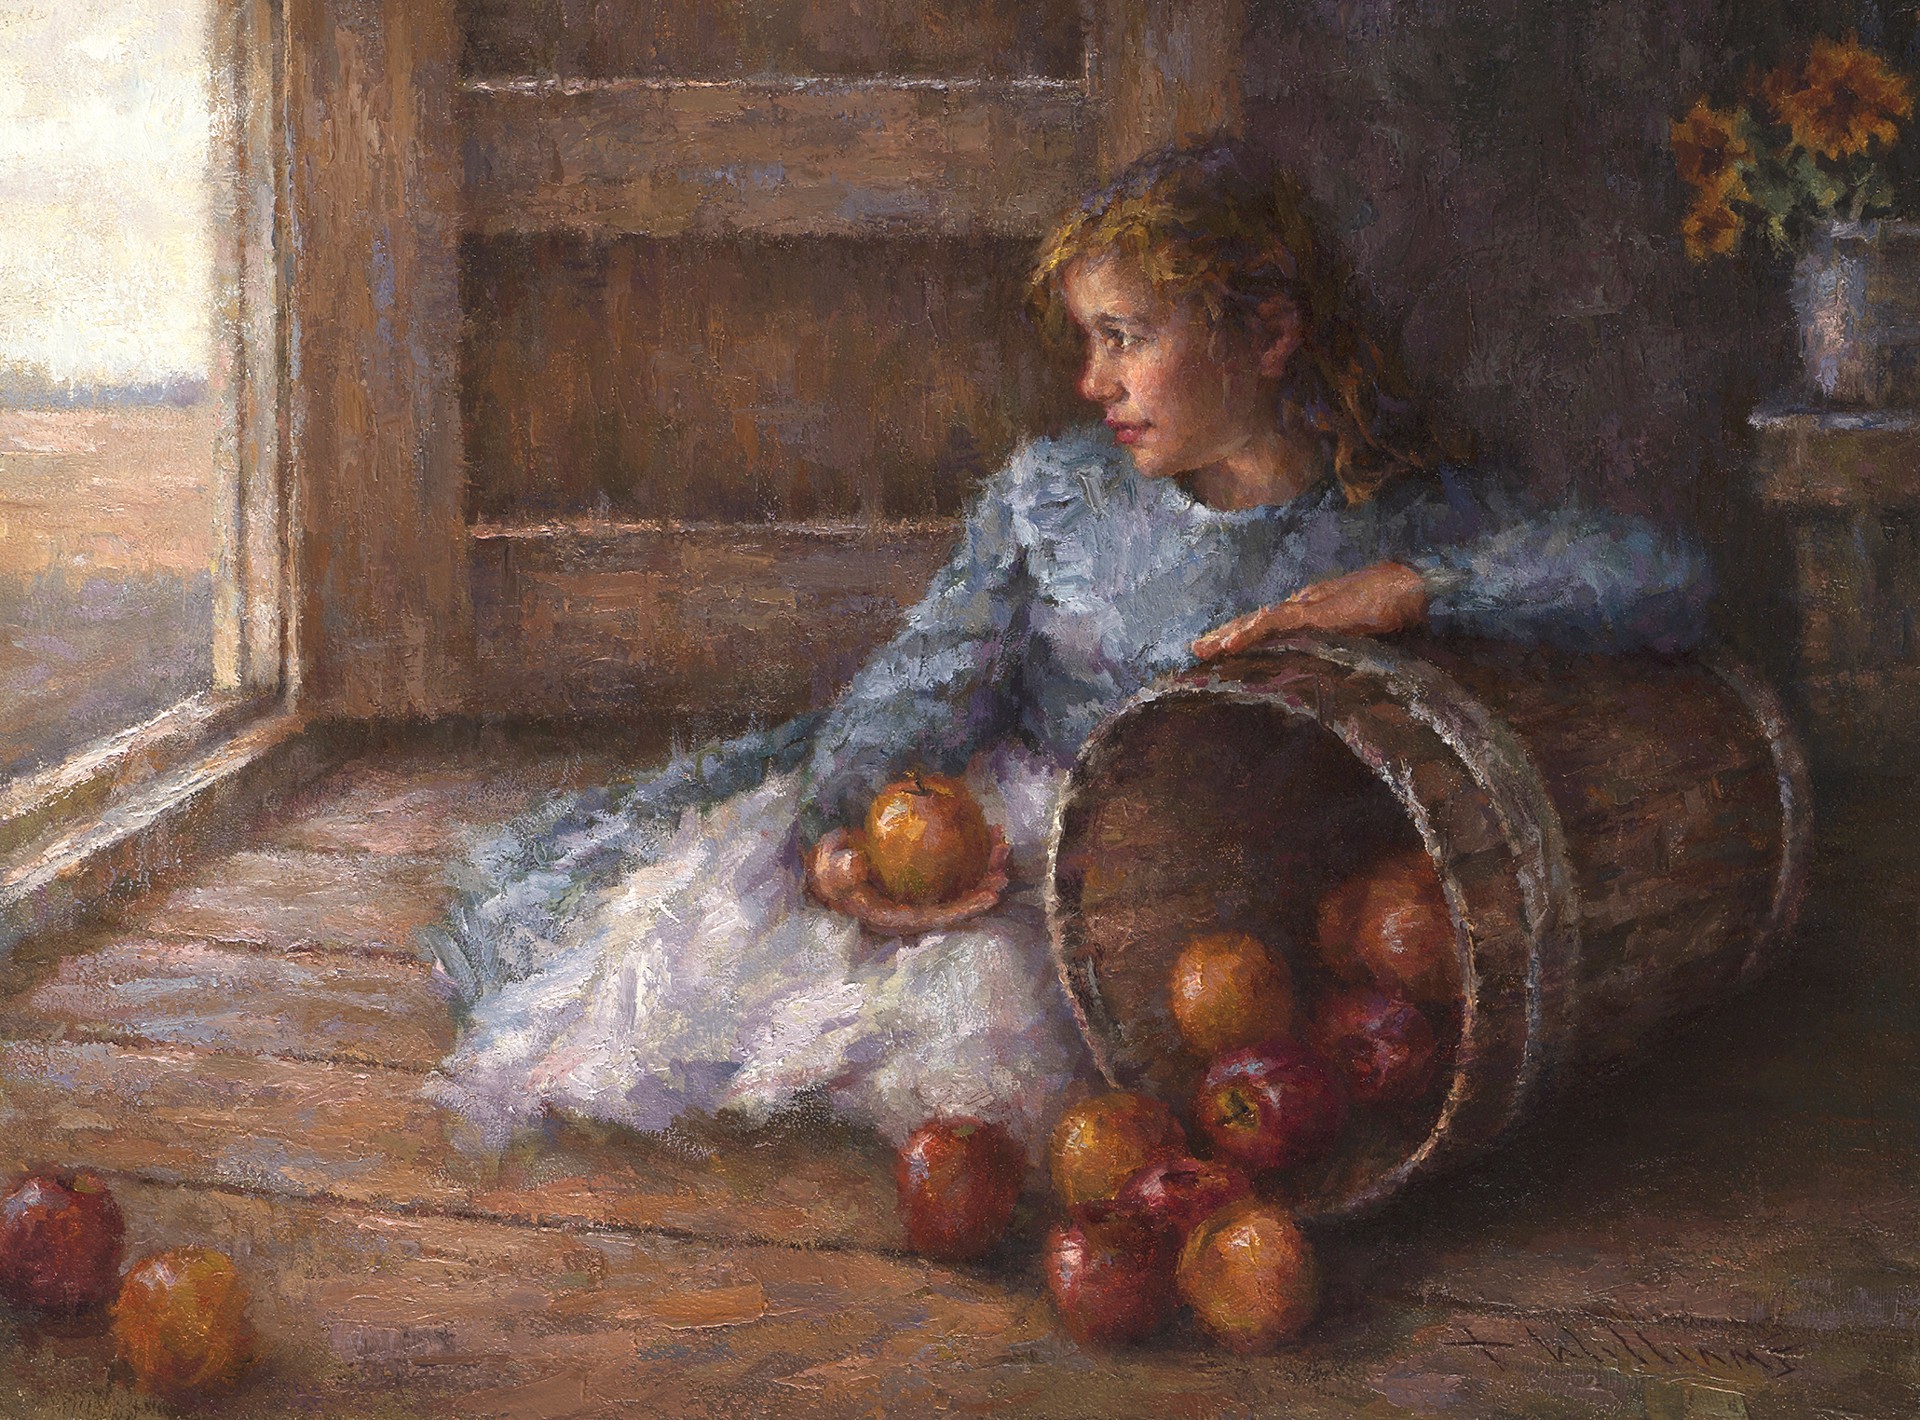 Apples and Annie by Todd Williams